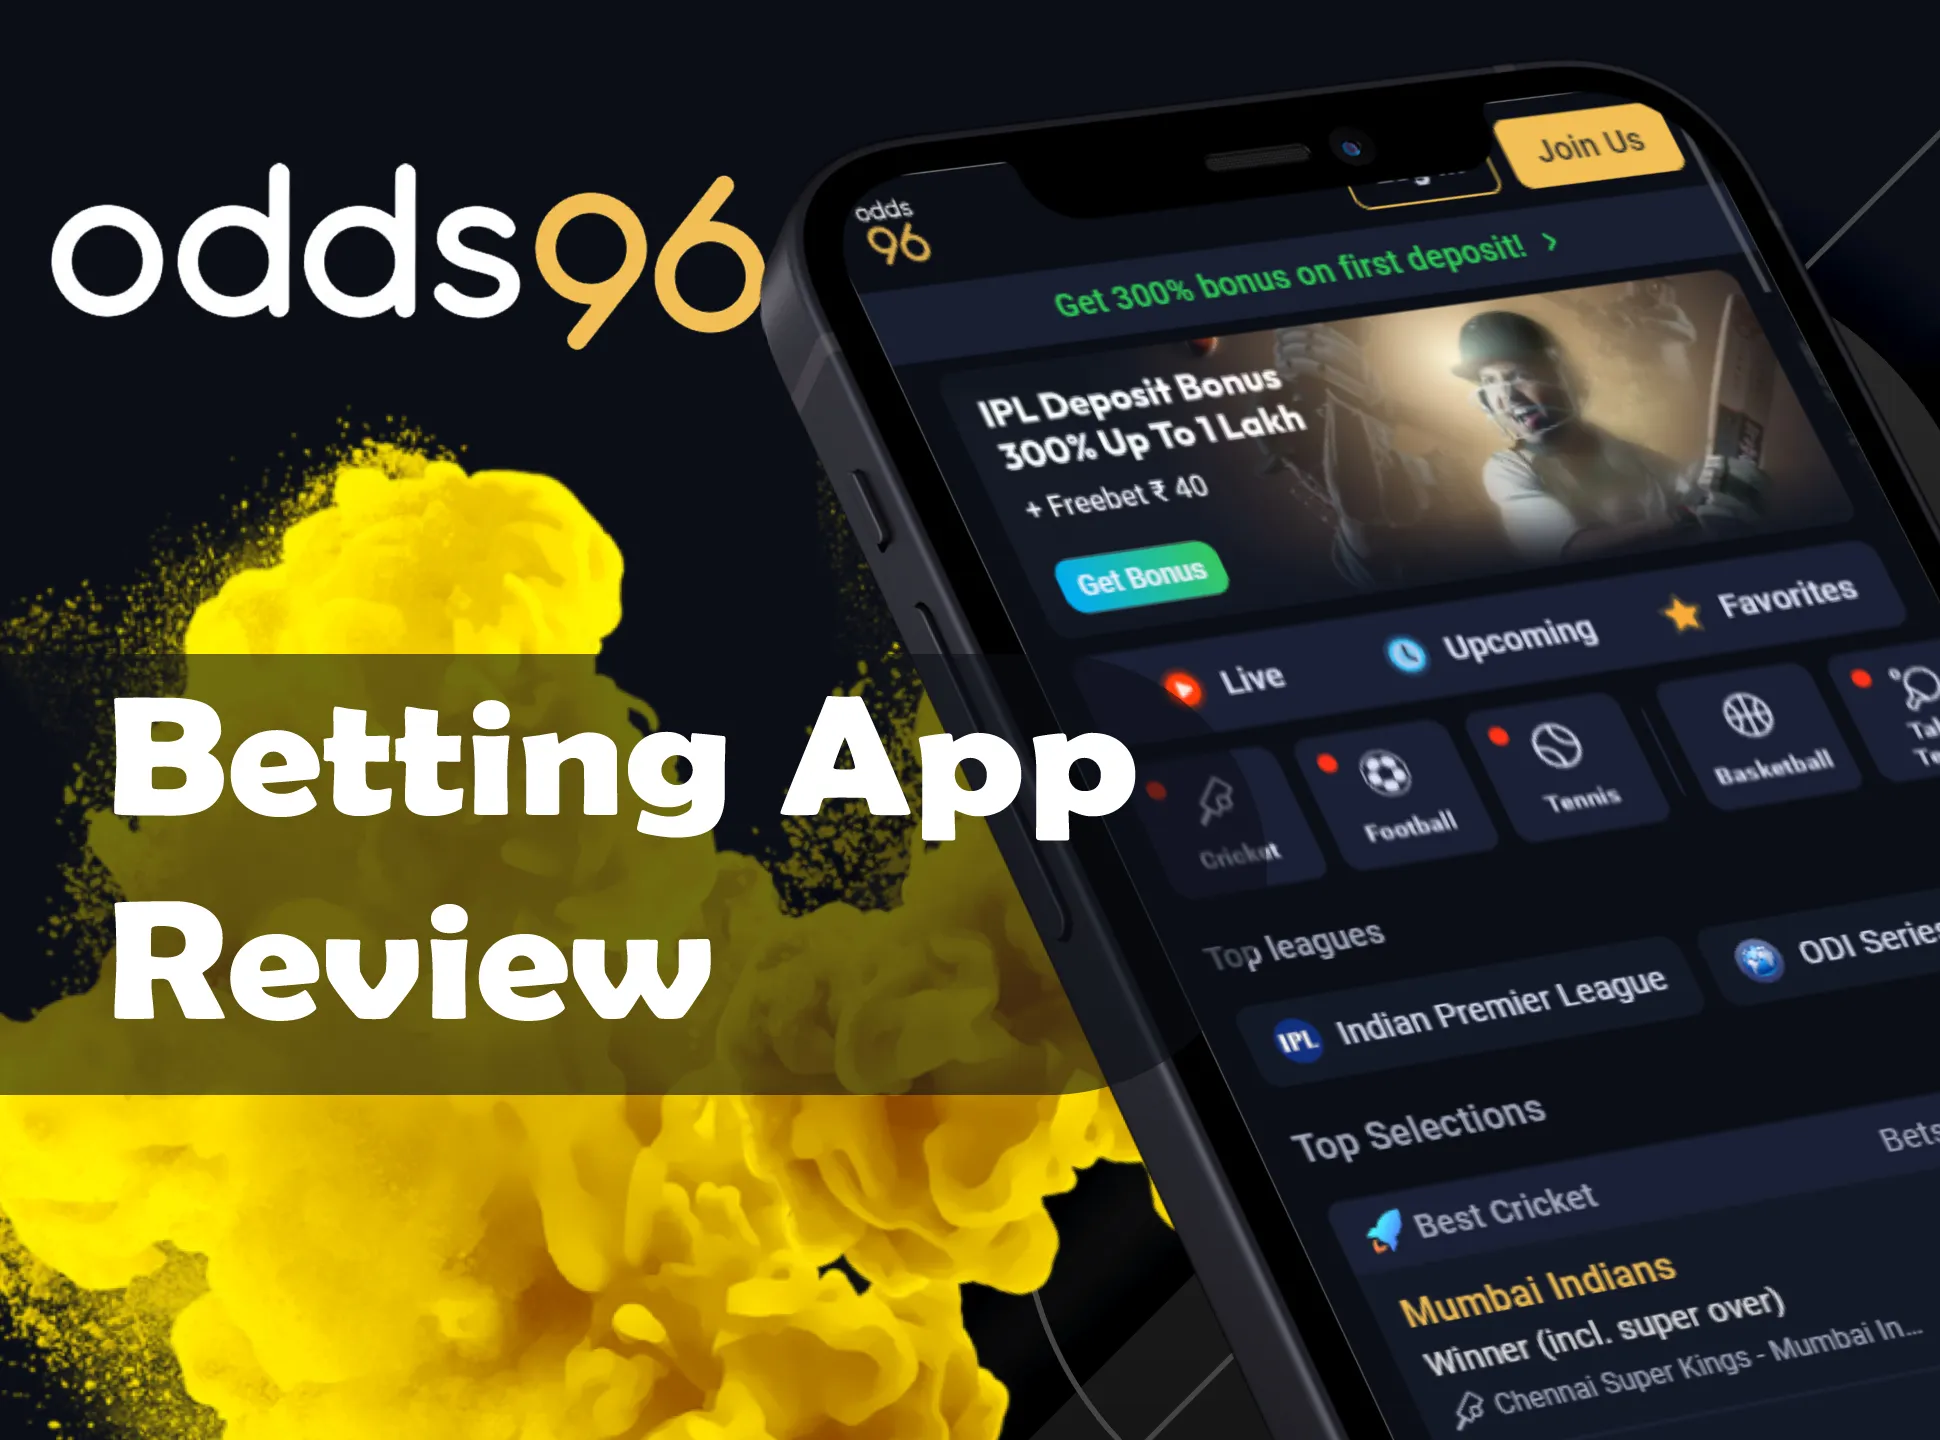 Read our article and learn how to use Odds96 app.